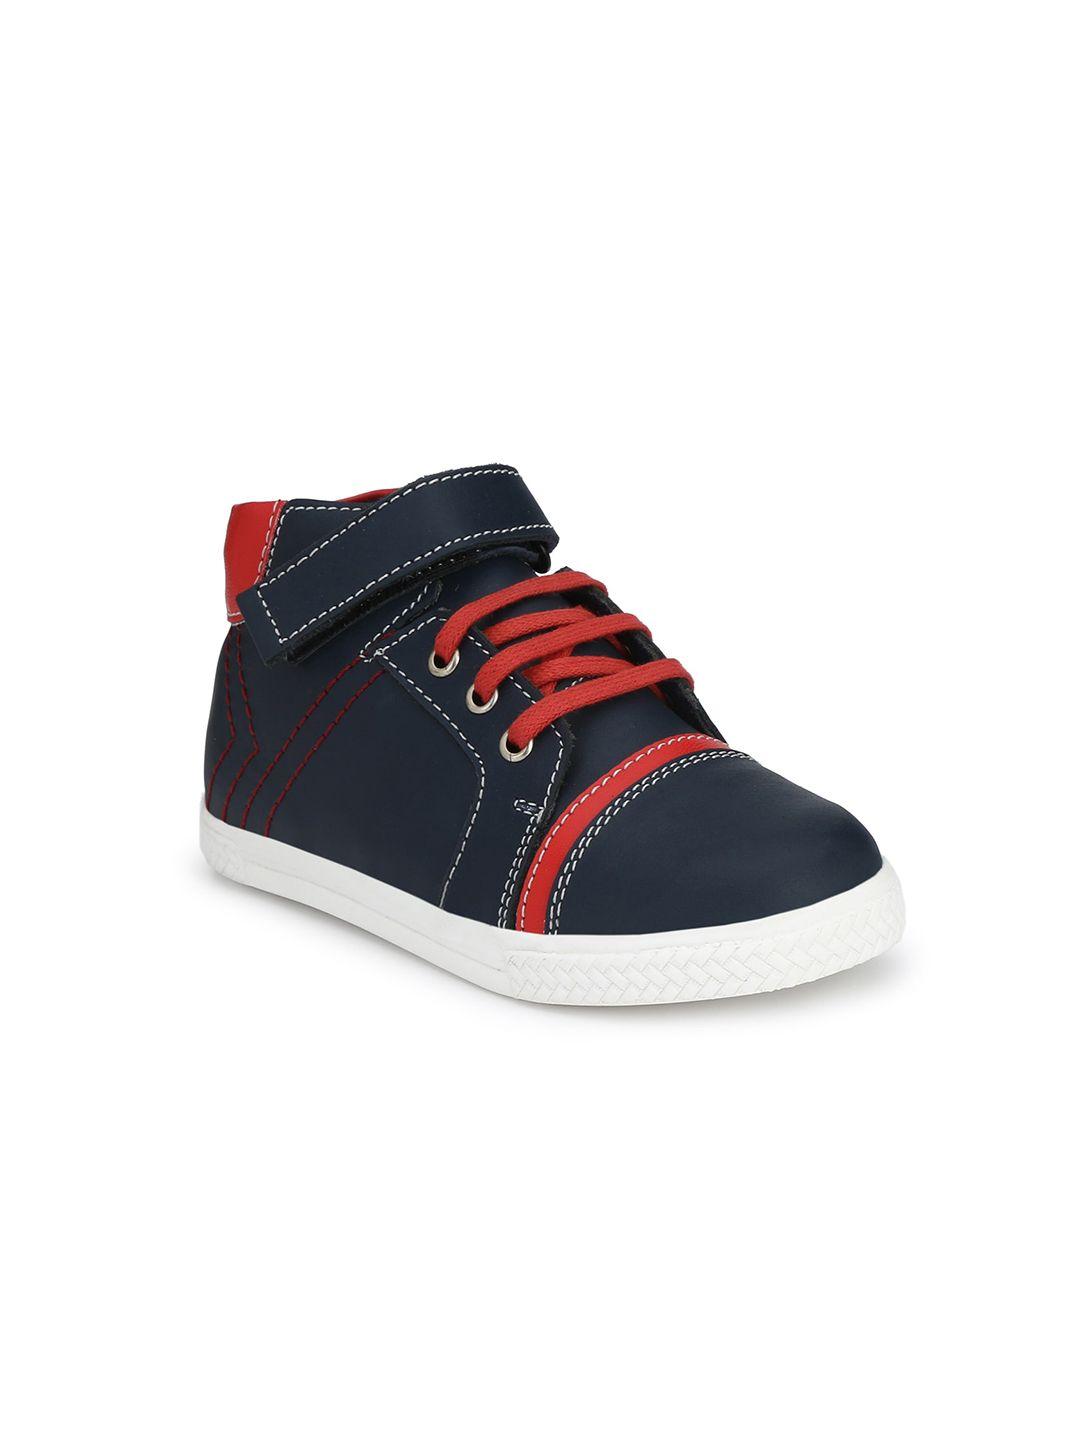 tuskey boys navy blue & red leather sneakers